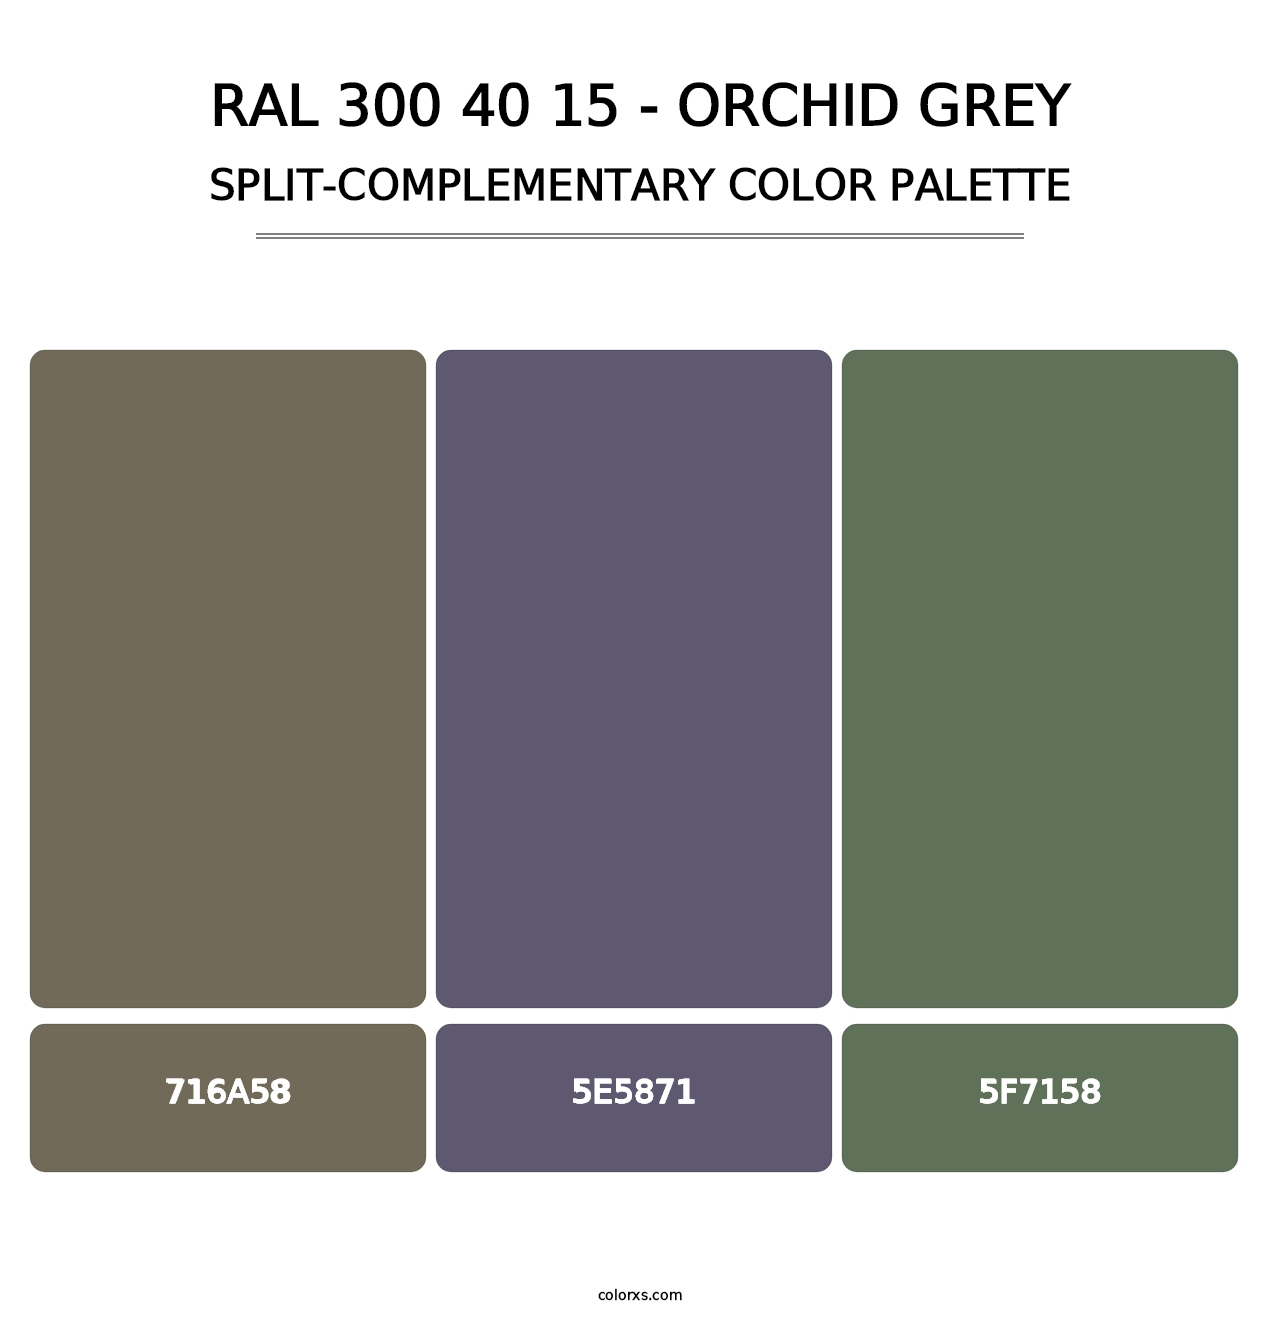 RAL 300 40 15 - Orchid Grey - Split-Complementary Color Palette